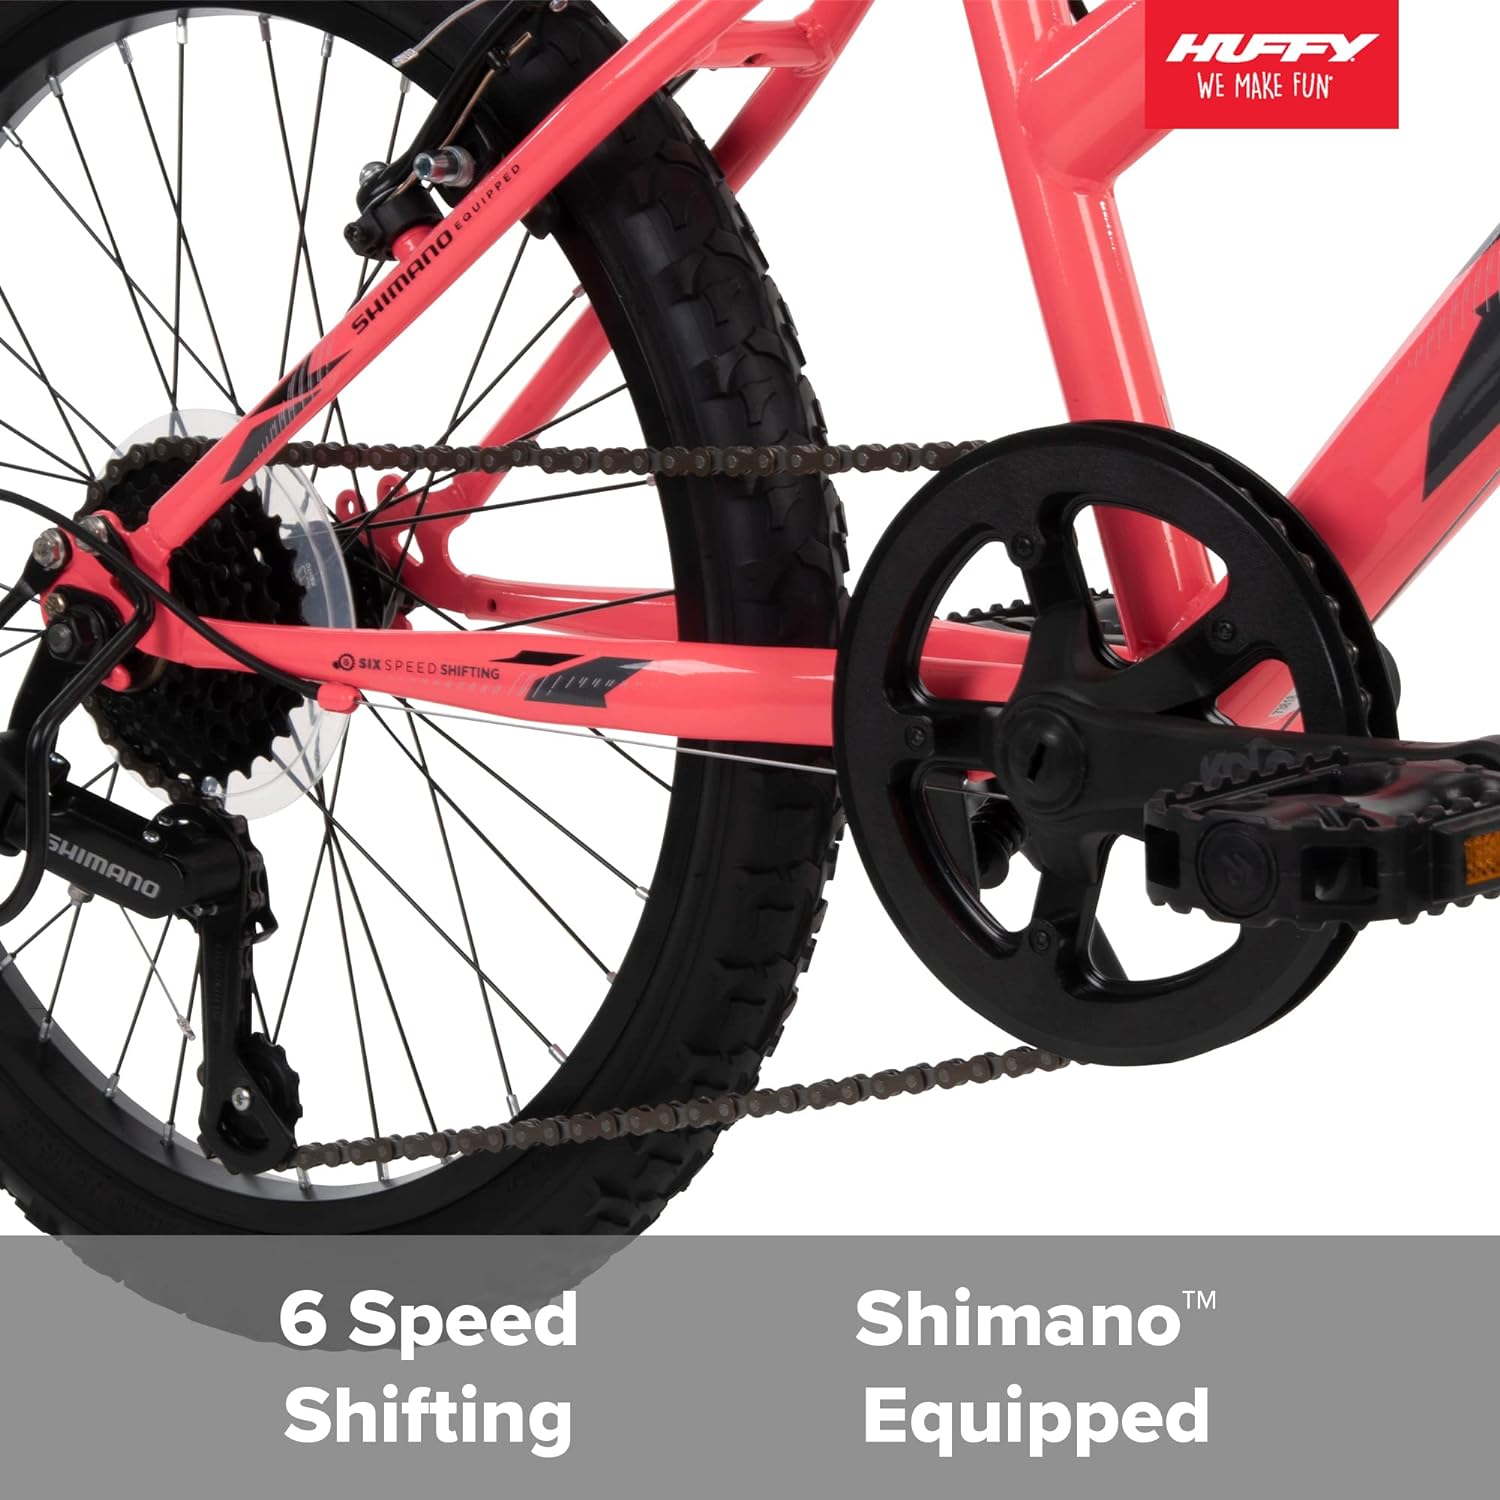 Epic Huffy Hardtail Stone Mountain Bike Review